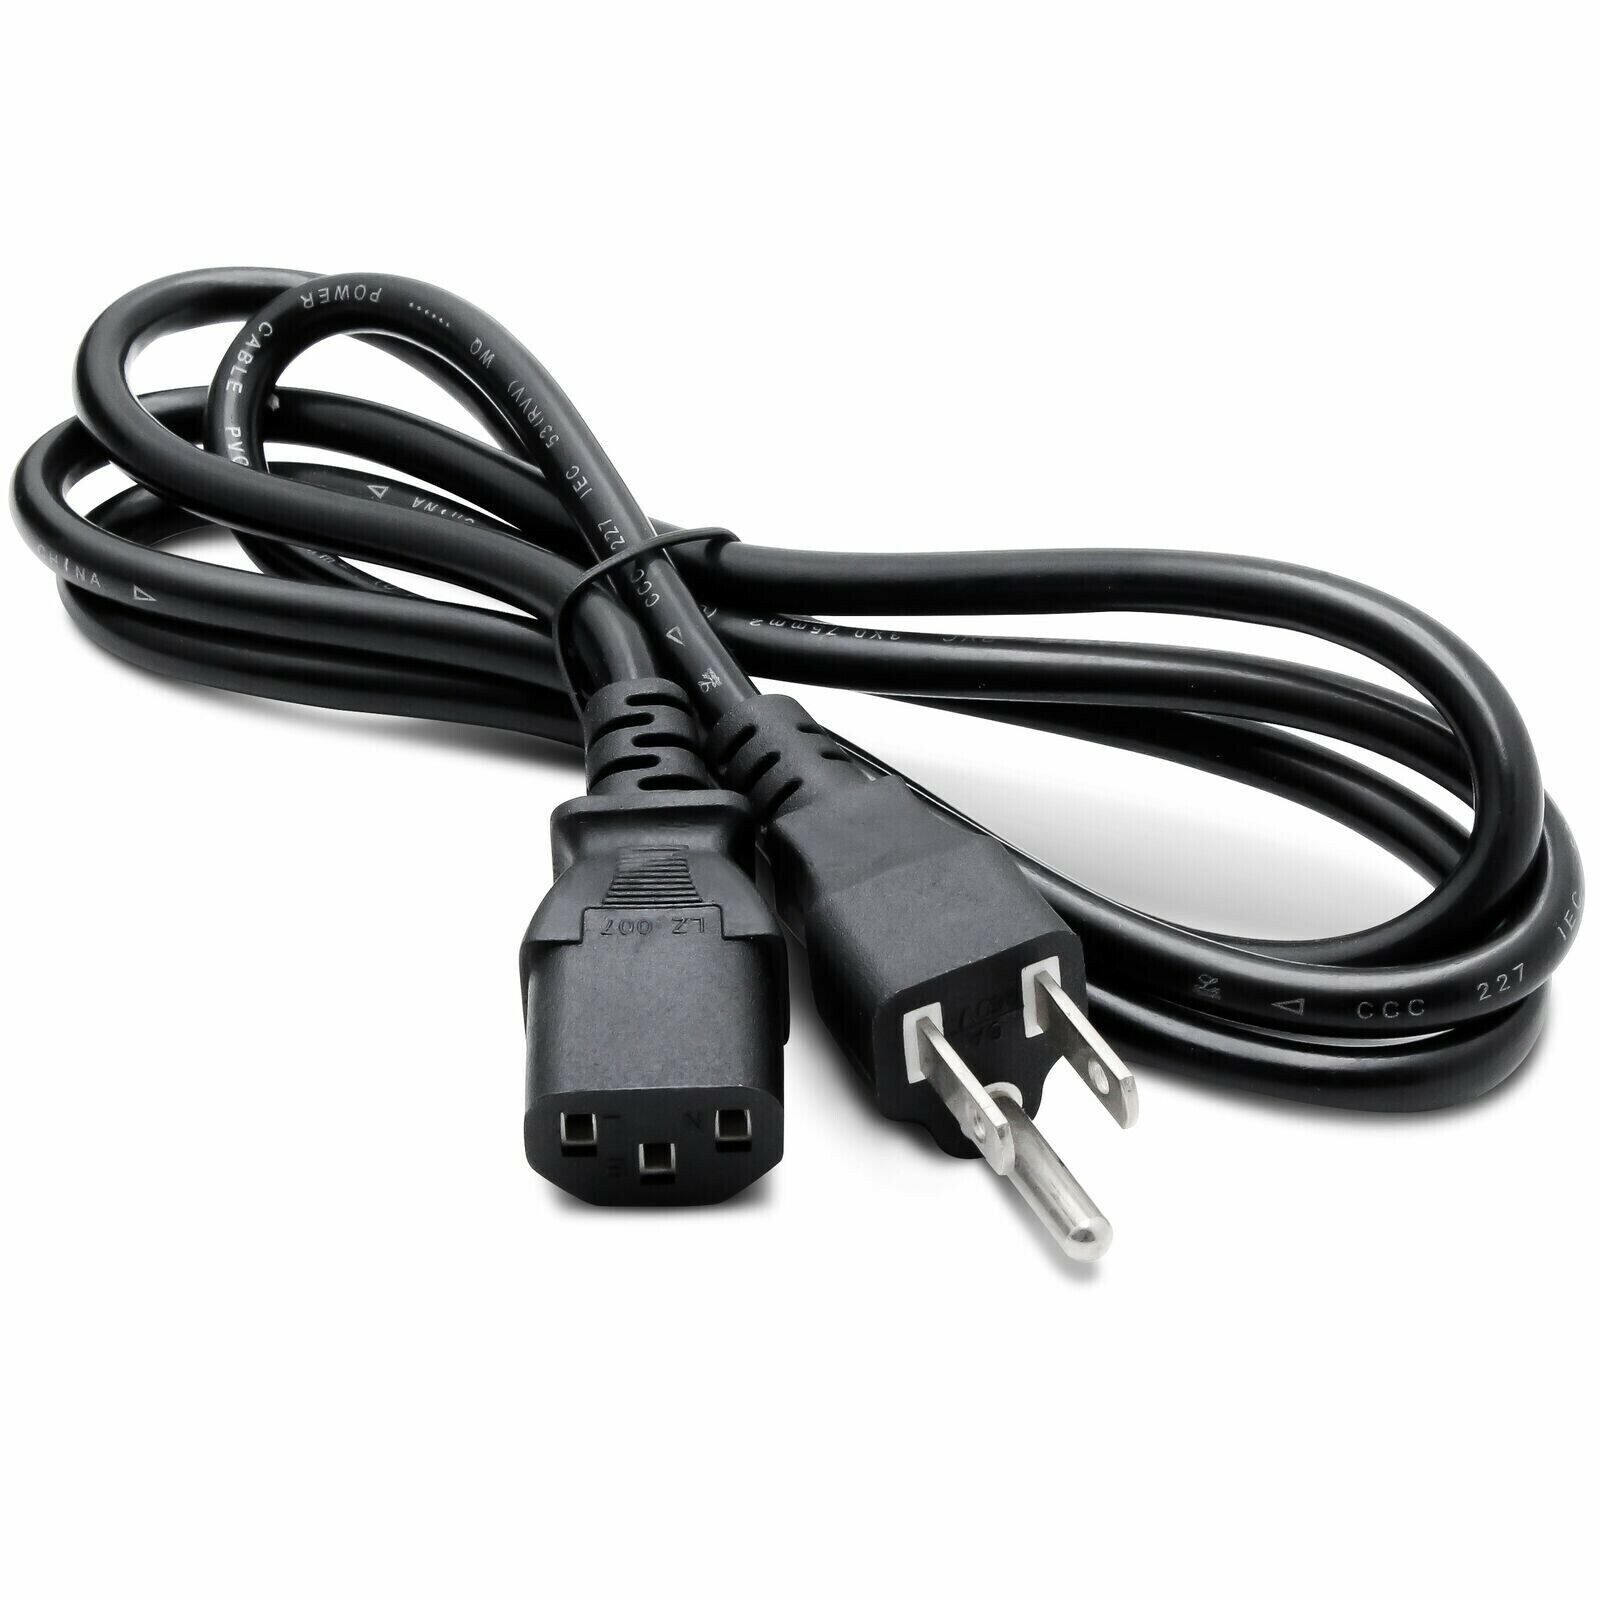 5ft ETL AC Power Cord Cable Lead For HP W1907 19inch Quot LCD TelevisIon 3-Prong